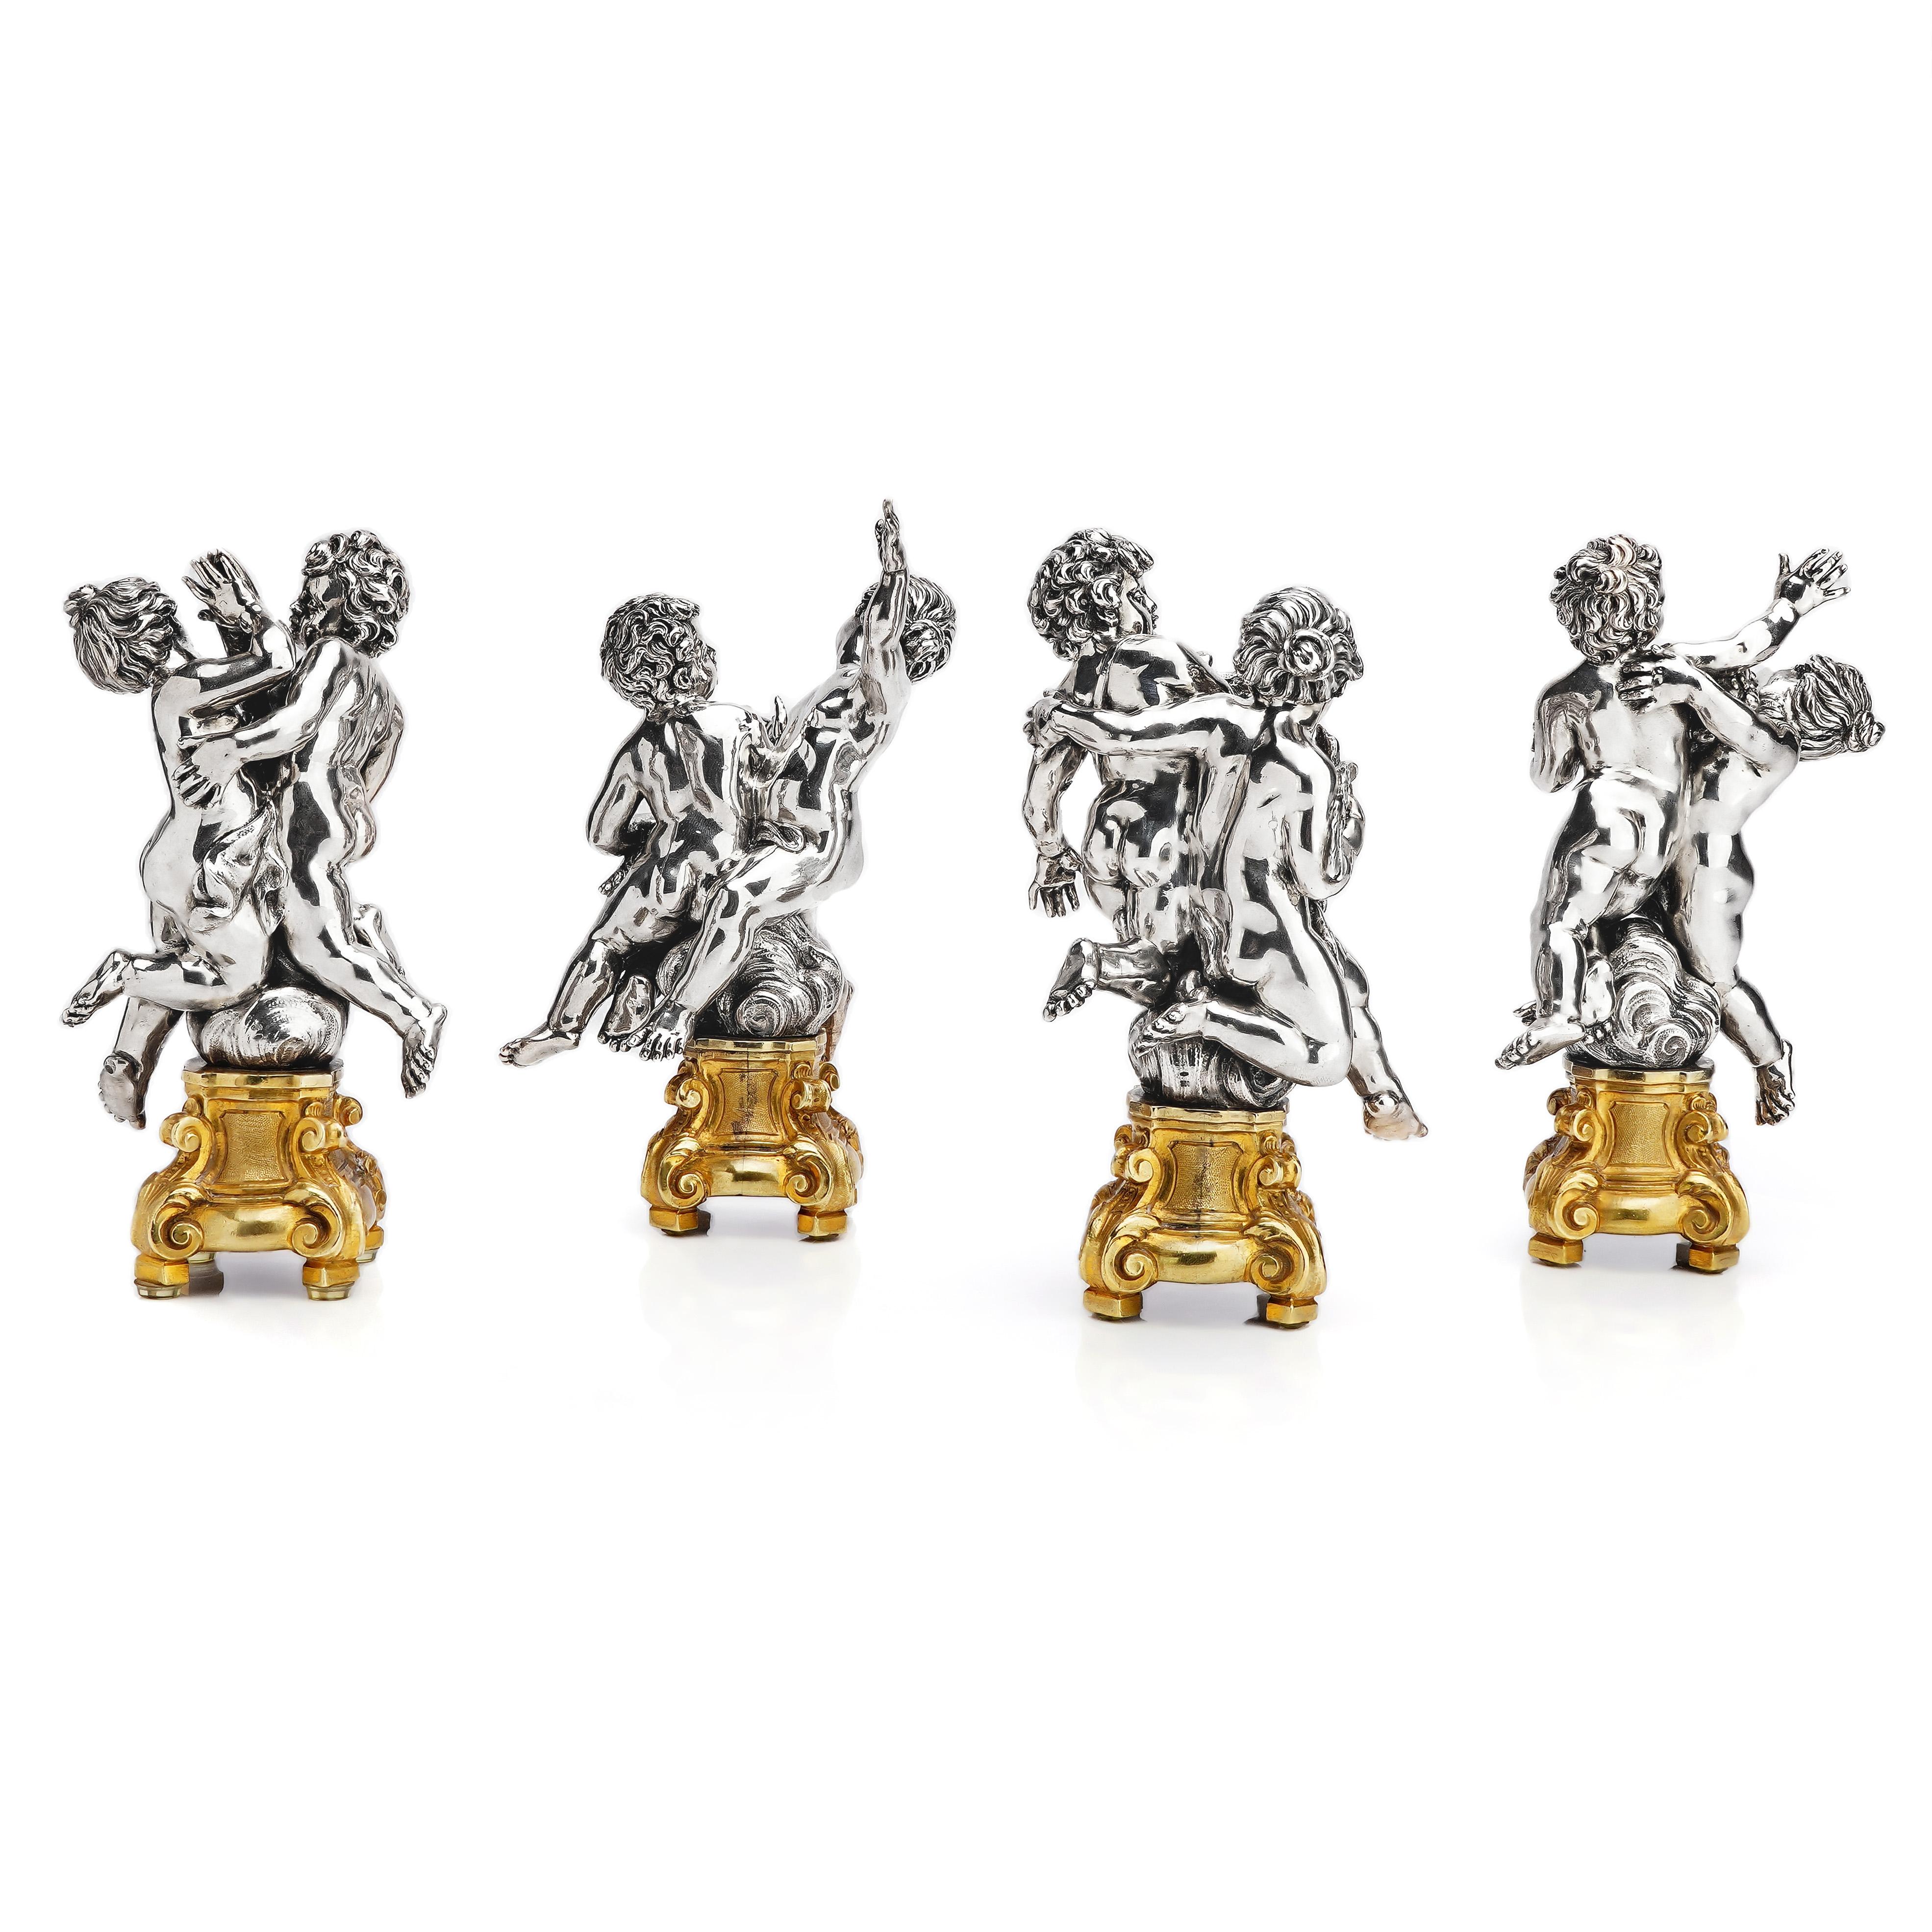 Luigi Avolio Set of Four 800, Italian Silver and Ormolu Figural Groups In Excellent Condition For Sale In Braintree, GB